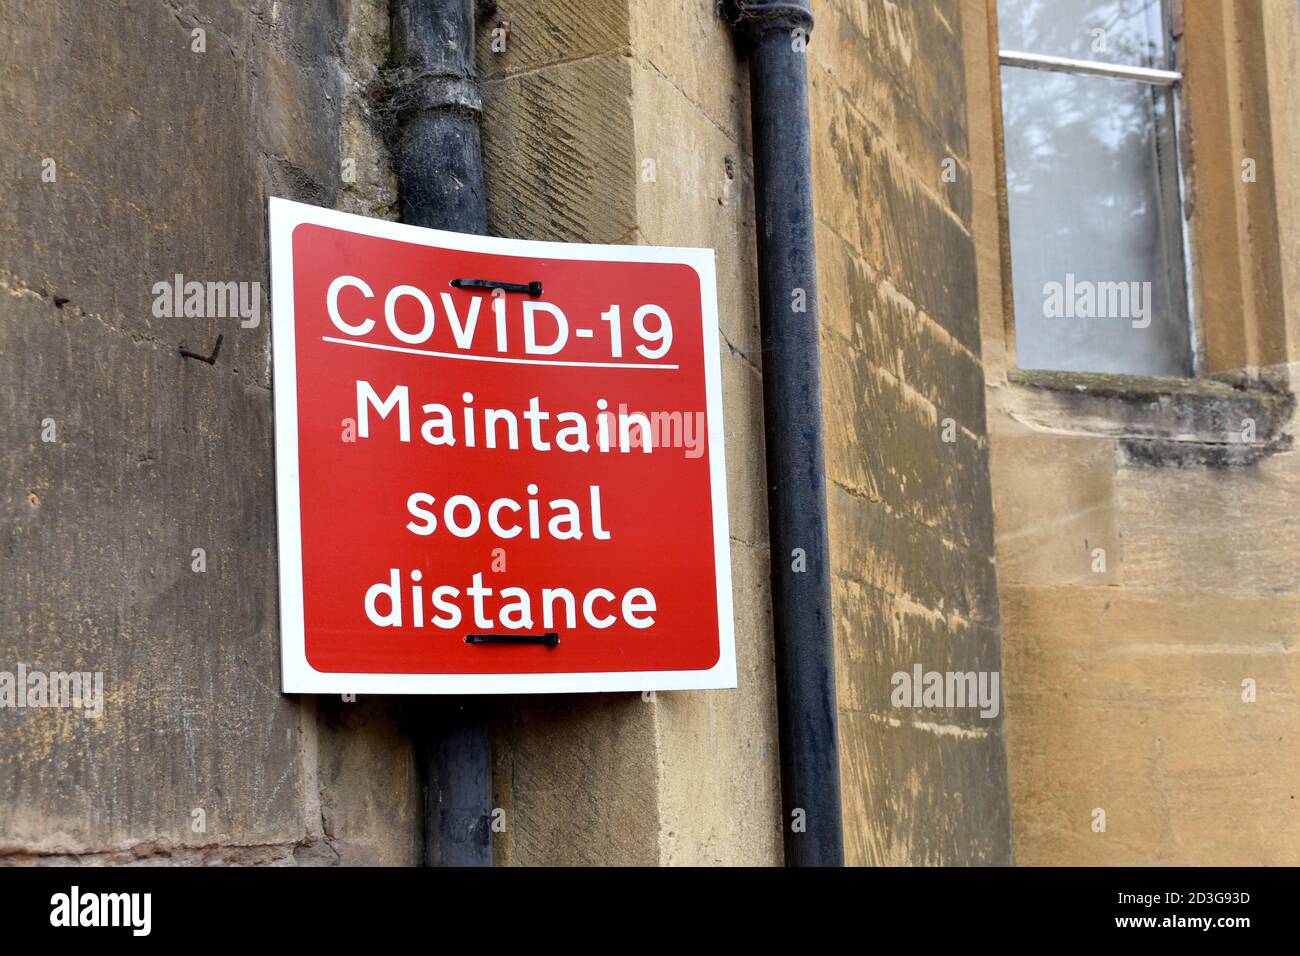 close up of red and white COVID-19 social distance sign outside on stone wall building with window Stock Photo